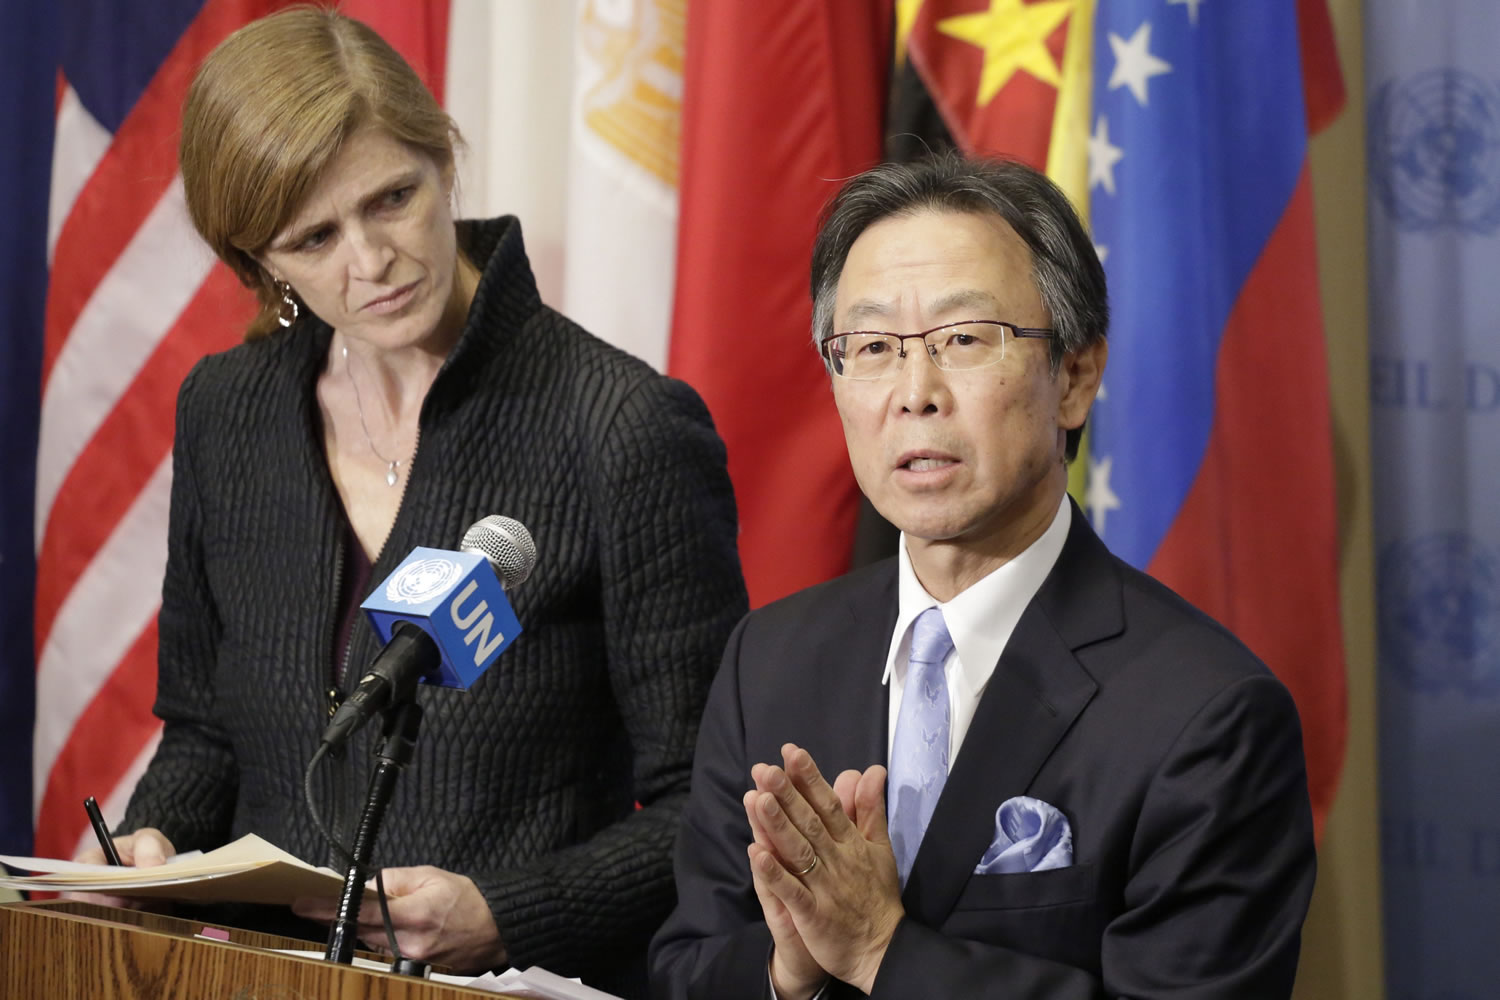 Samantha Power, left, the U.S. Ambassador to the United Nations, listens as Motohide Yoshikawa, Japan&#039;s ambassador, makes comments to the media following a Security Council meeting at U.N. headquarters on Sunday.